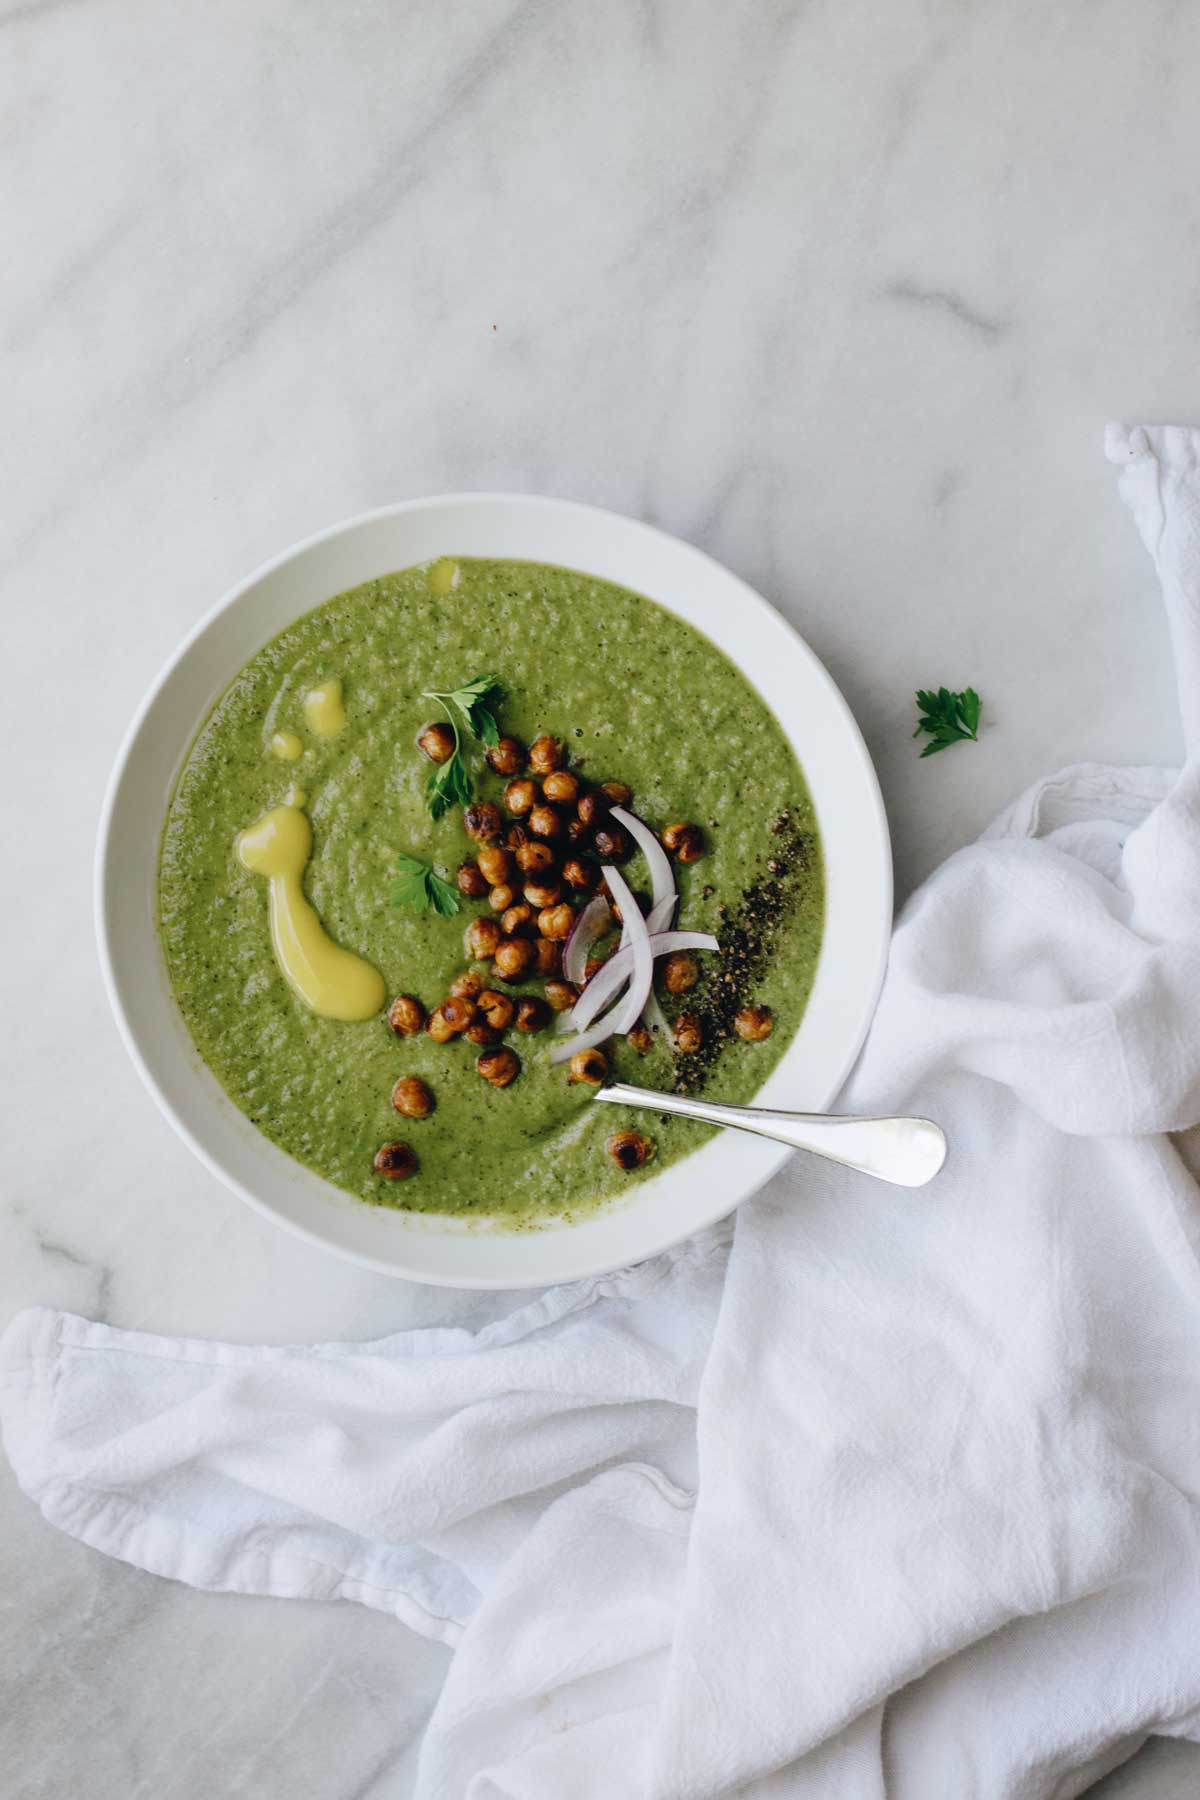 GREEN VEGETABLE SOUP WITH ROASTED CHICKPEAS